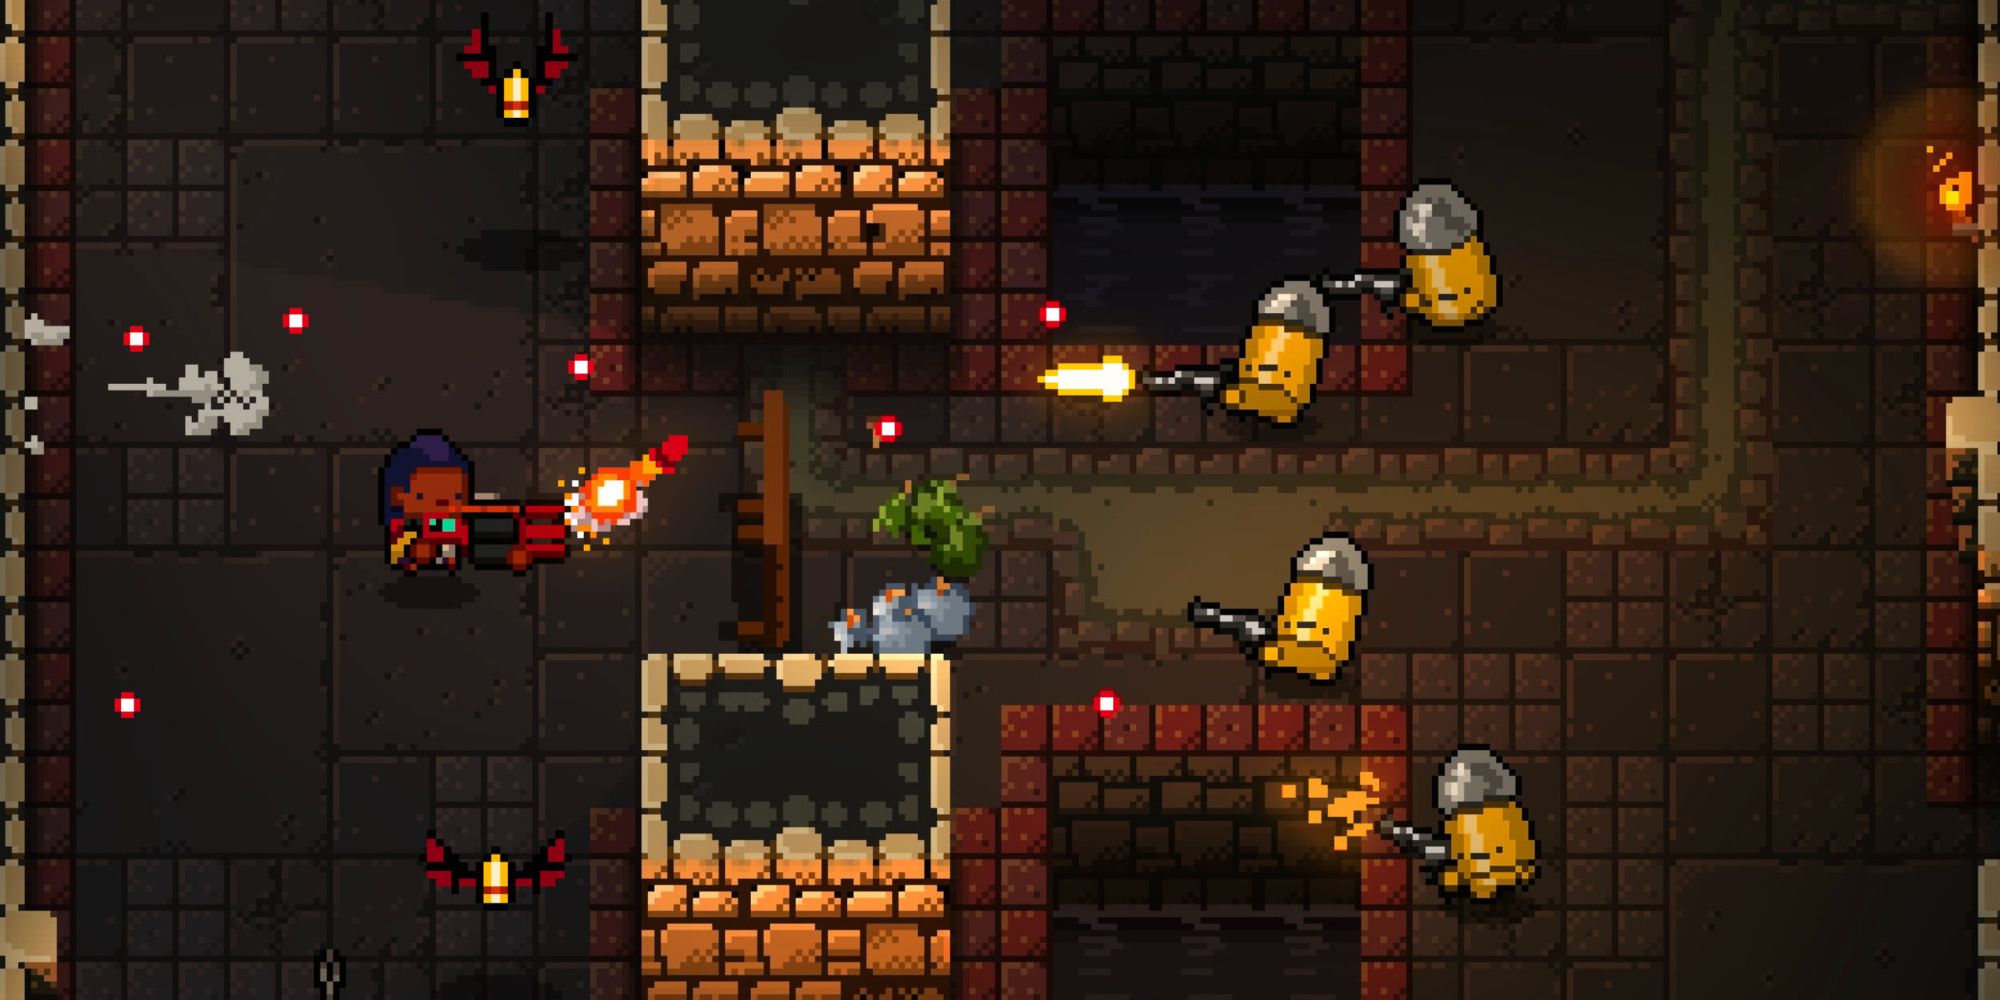 The hunter fights behind an upside down table and fights shot enemies in Enter the Gungeon